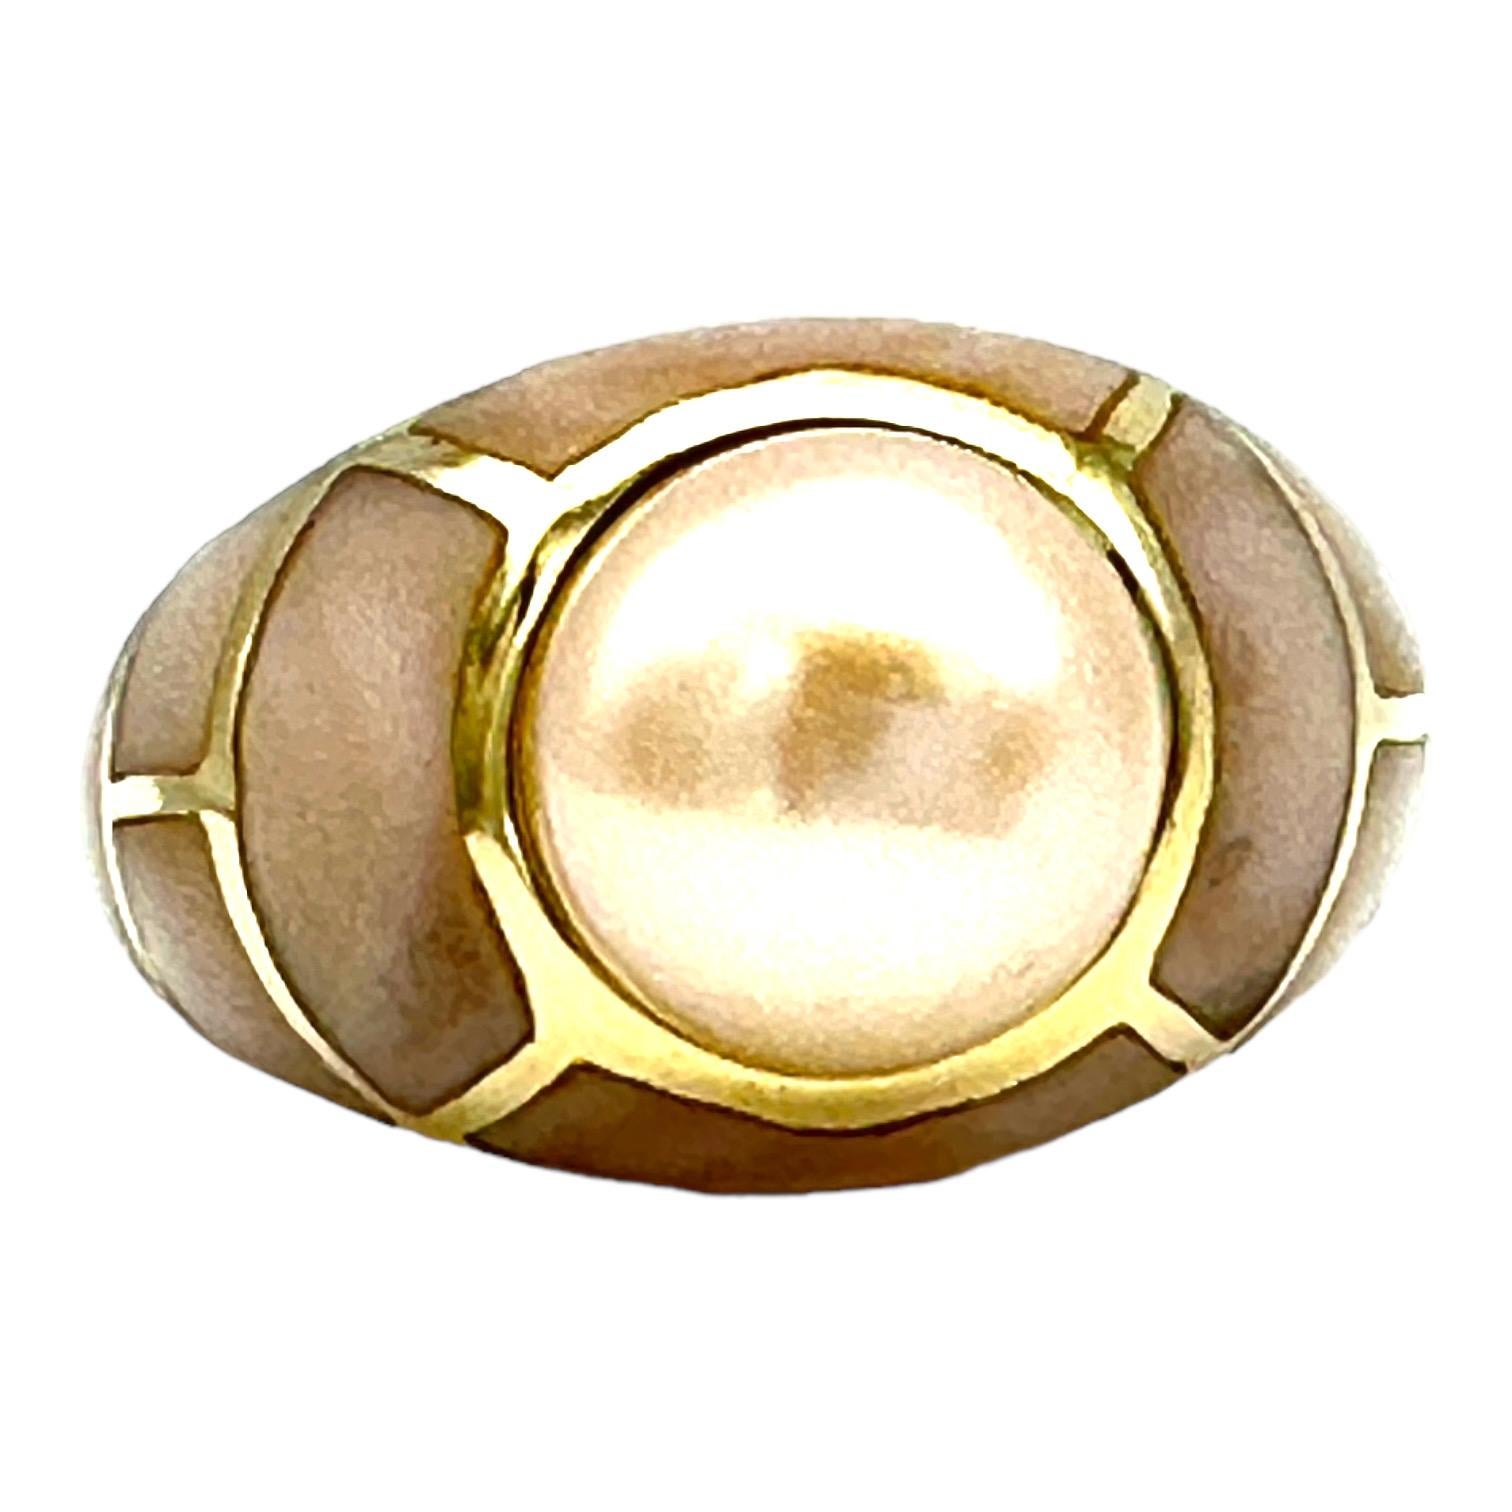 14K dome style ring features a beautiful cultured pearl measuring 9.8 mm; The setting is an inlay-style with a mother of pearl colored in a creamy pink hue. The ring is 12.80 mm wide, and the ring size is 7. 
This ring is both elegant and